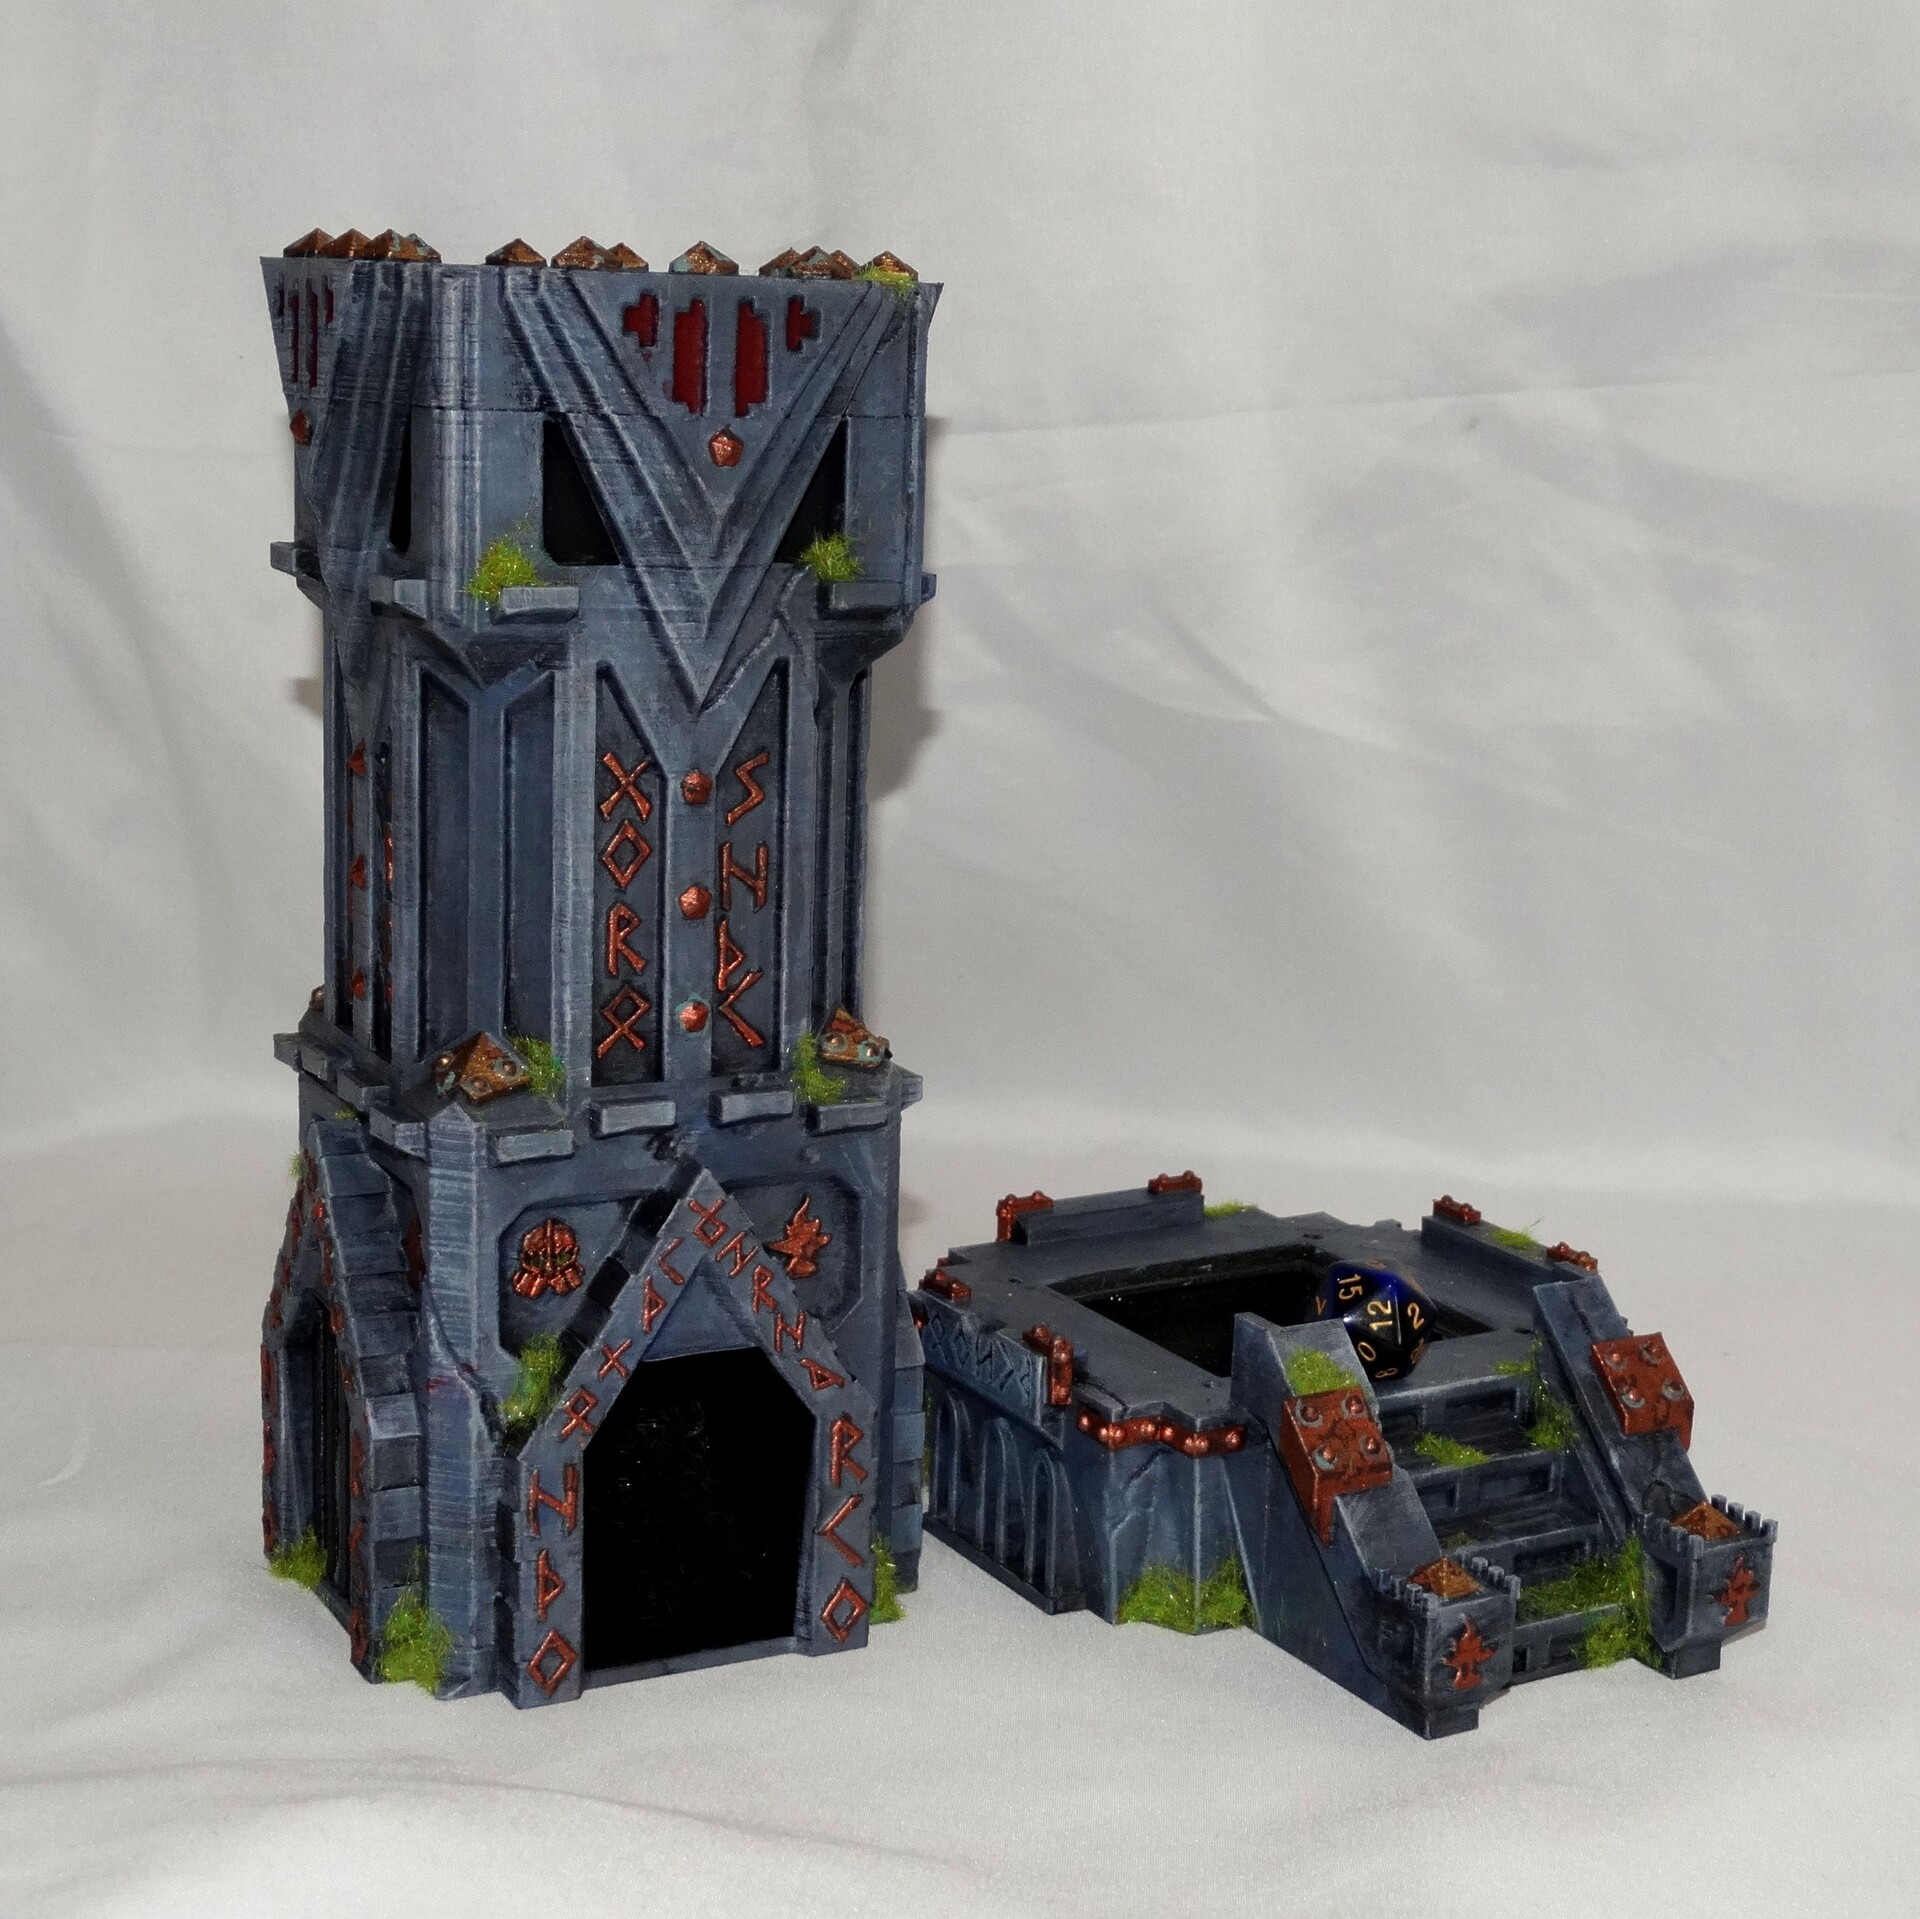 40k Fortress Of Salvation Style Dice Tower 28mm Wargamining 